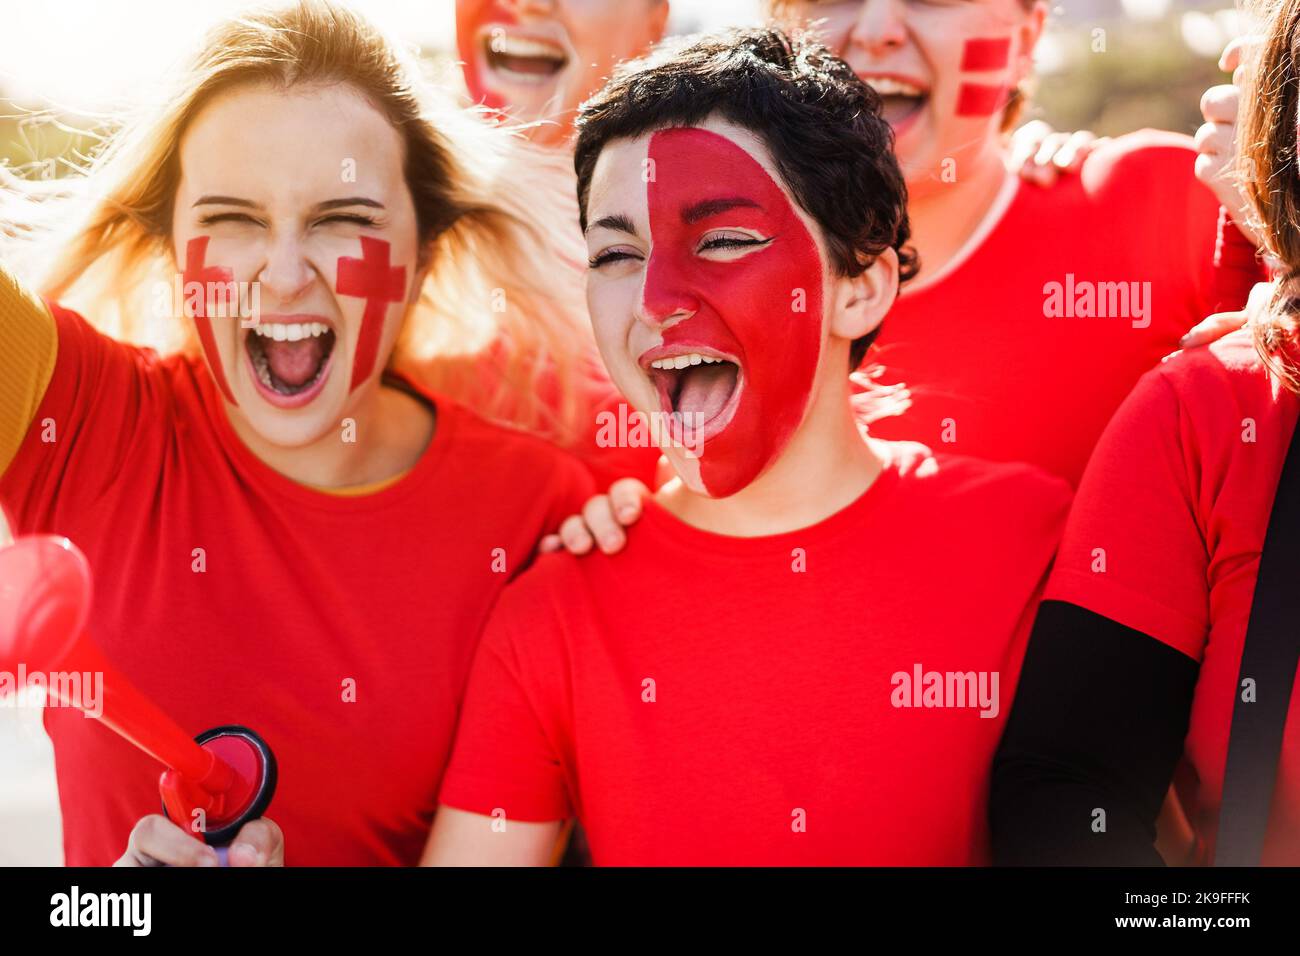 Red sport fans screaming while supporting their team - Football supporters having fun at competition event - Focus on center girl face Stock Photo